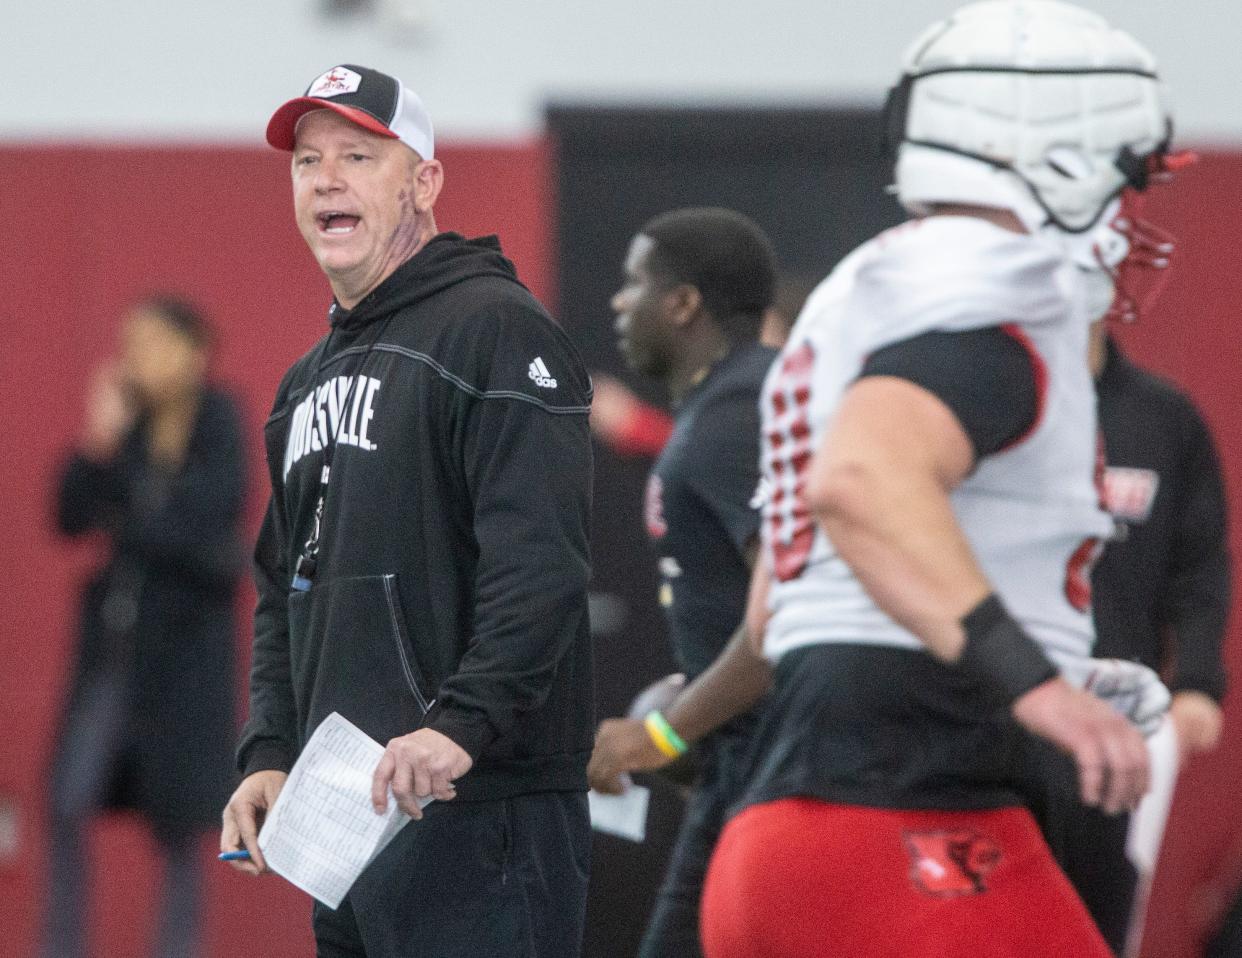 Louisville head football coach Jeff Brohm oversees practice April 12 ahead of the Red-White scrimmage game.